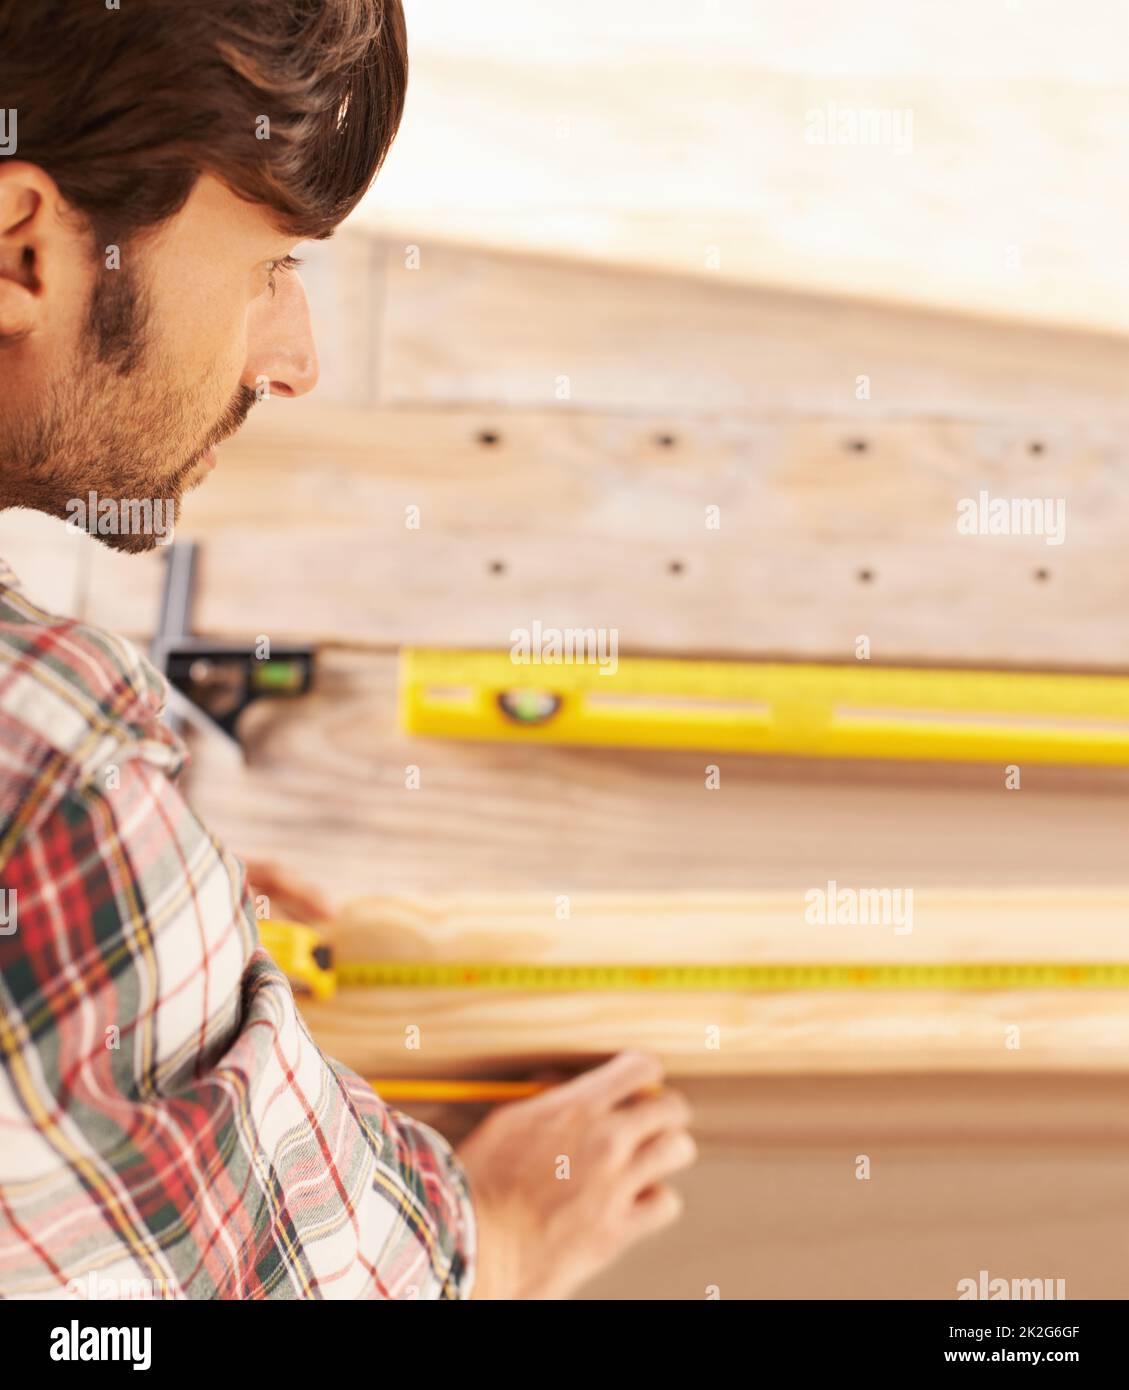 Getting his measurements just perfect. A handyman getting his measurements just perfect with a spirit level and measuring tape. Stock Photo